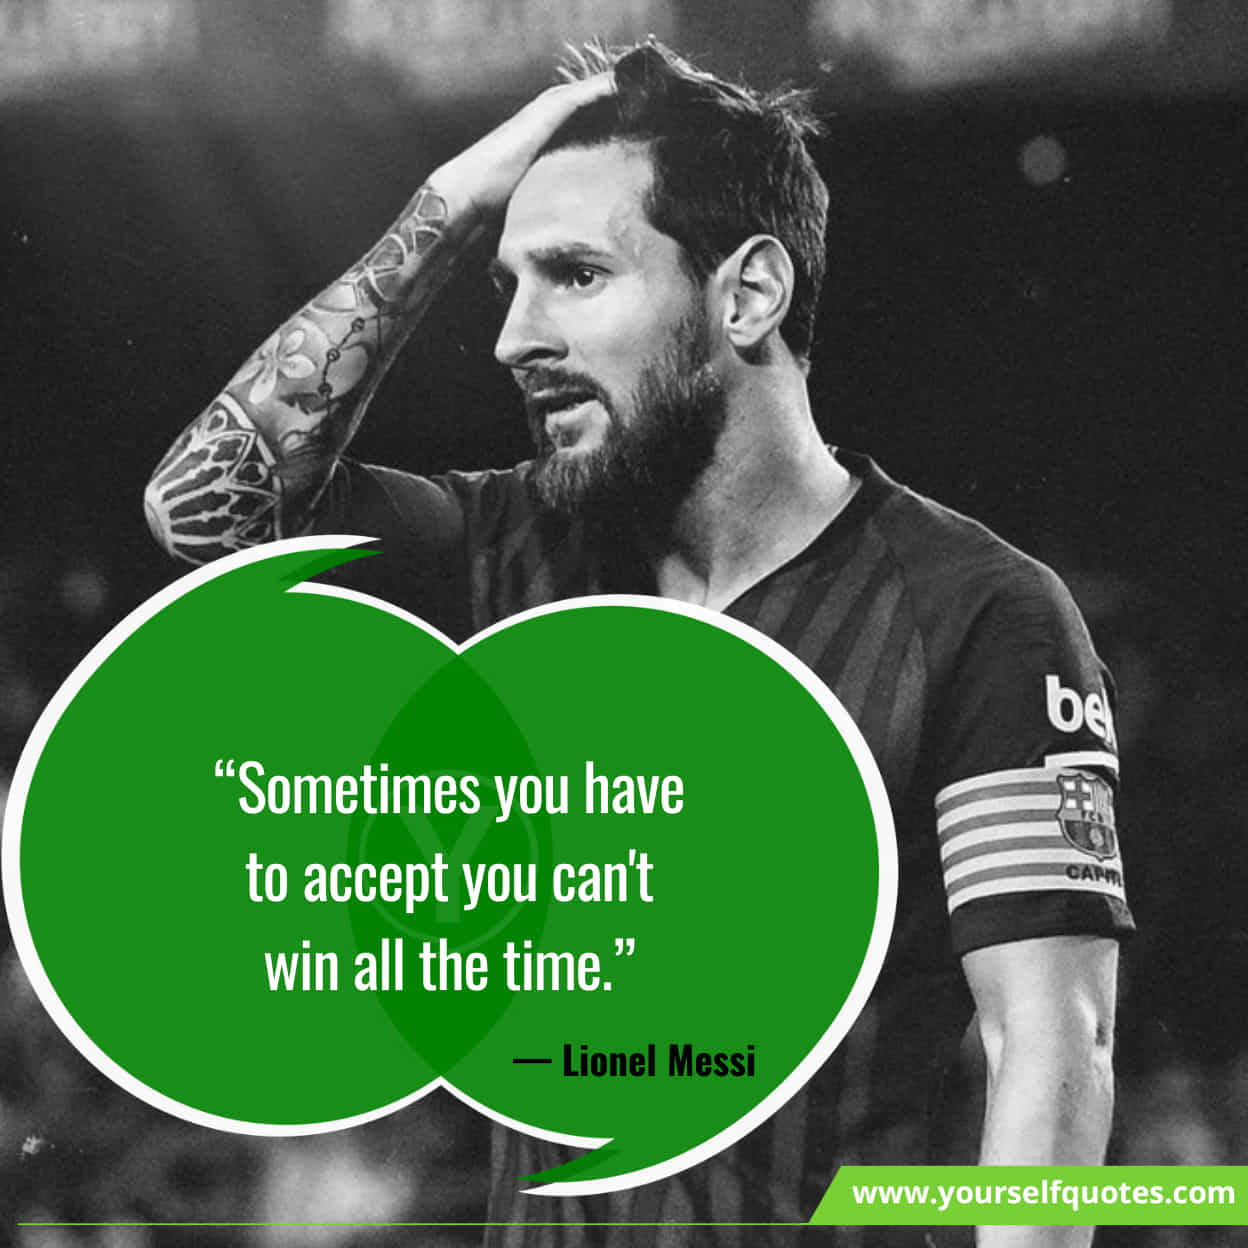 Inspiring Quotes From Lionel Messi